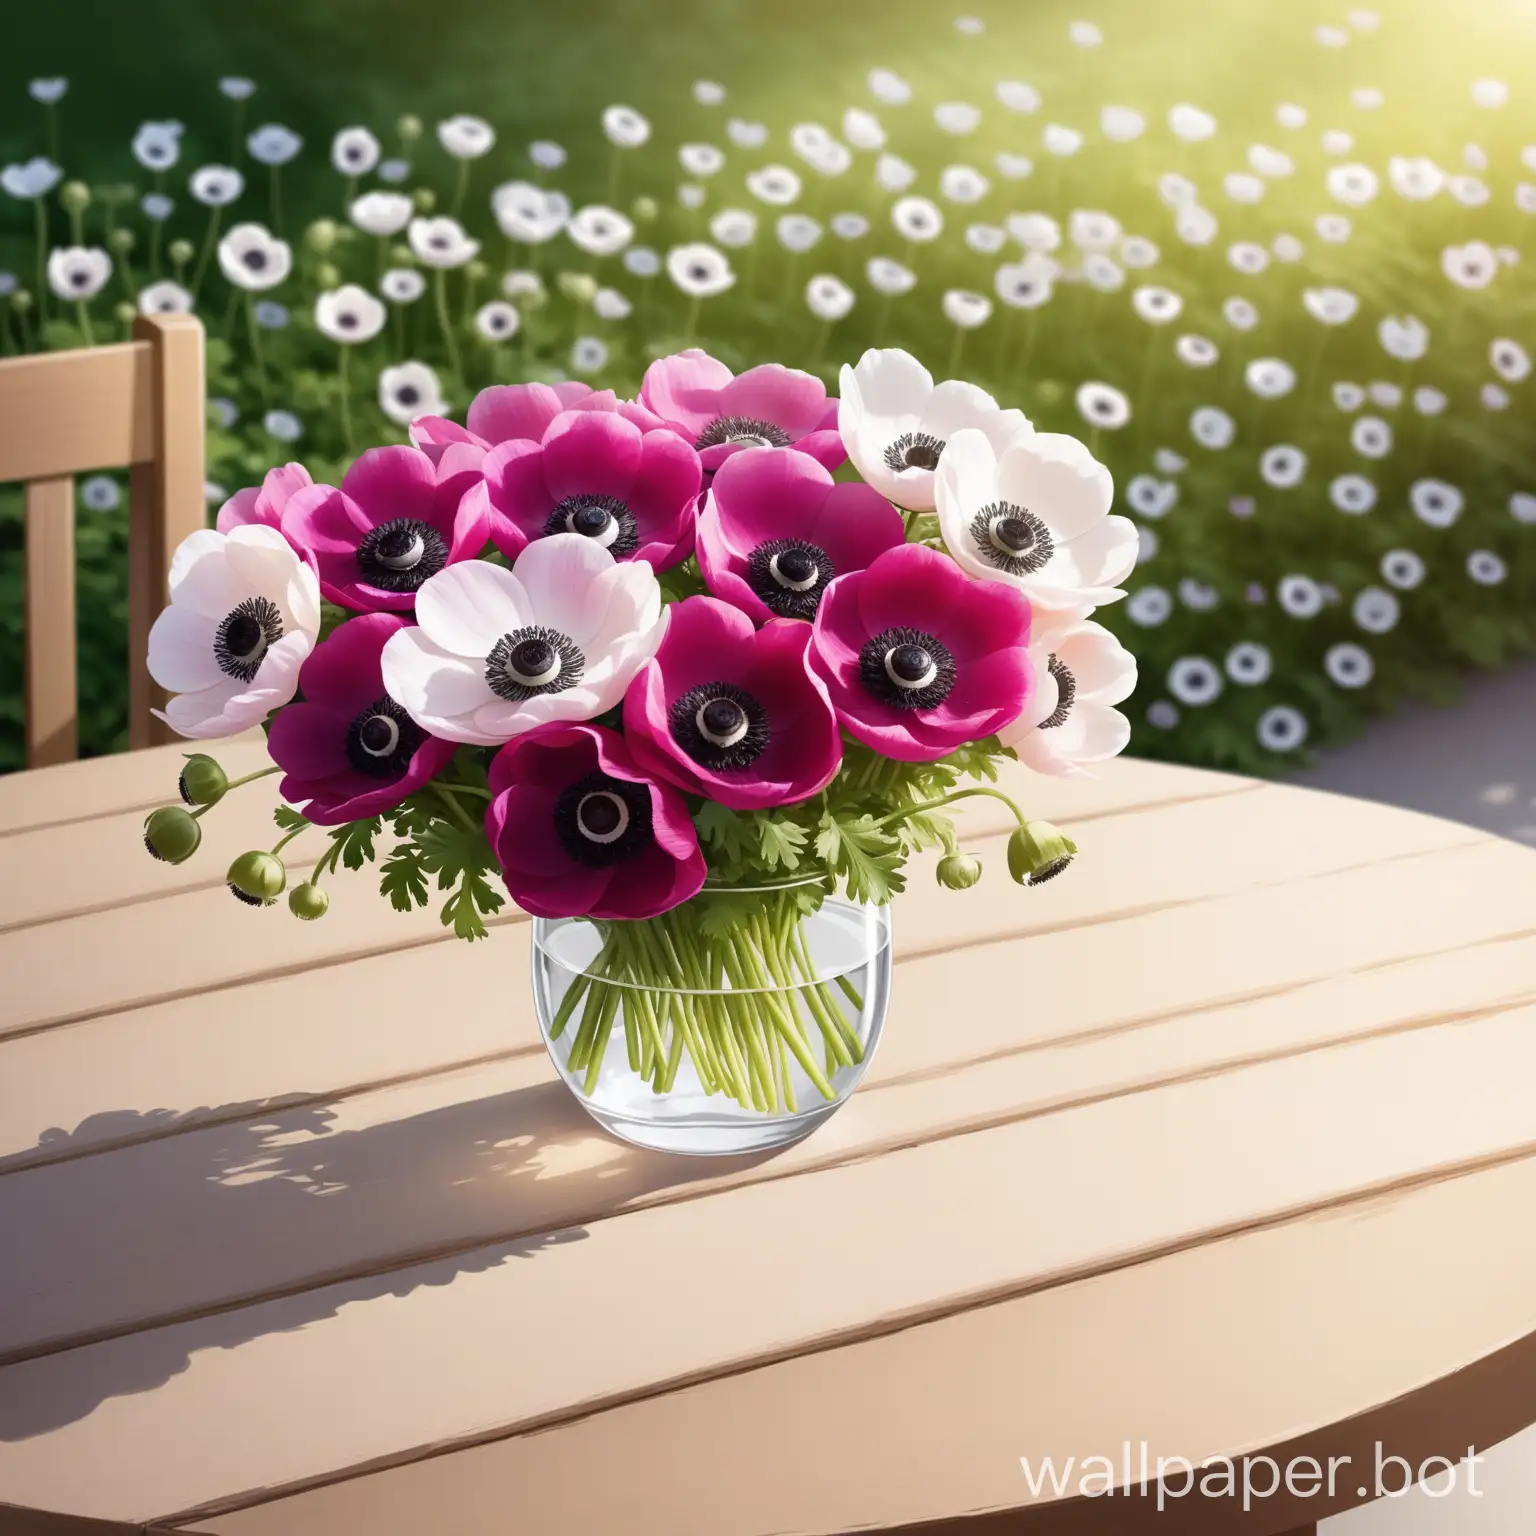 Colorful-Anemones-Flowers-Arranged-on-Table